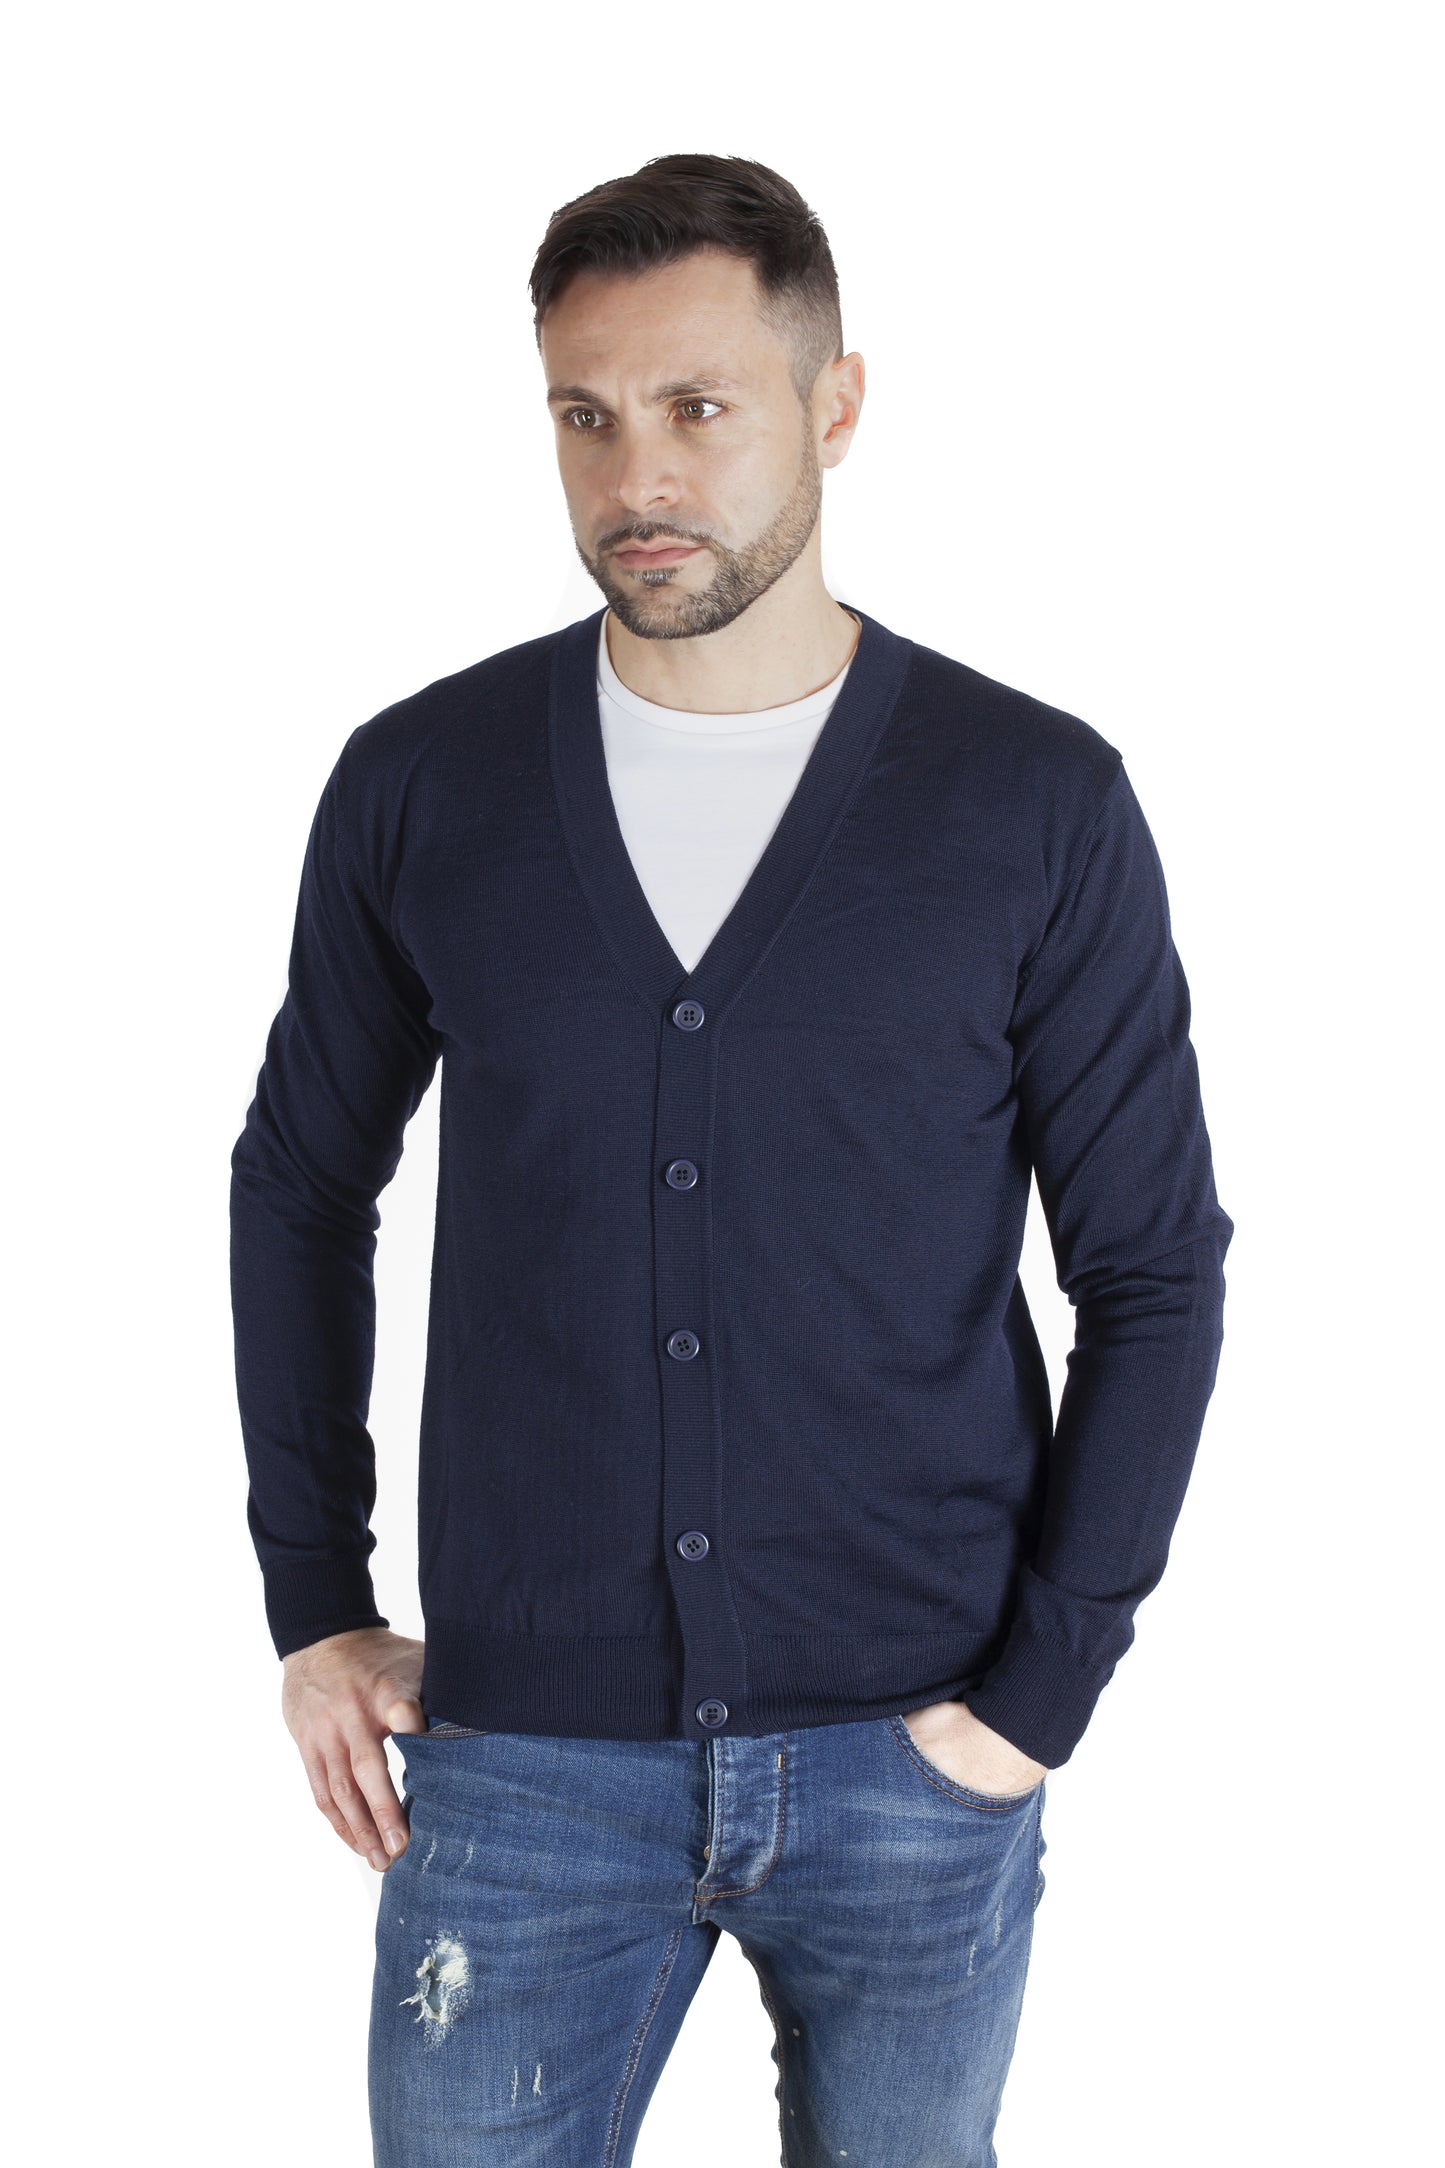 Pull Cardigan - Homme, Automne/Hiver - 100% Laine Vierge Mérinos Extrafine Sans Mulessing - 100% Made in Italy | Brunella Gori